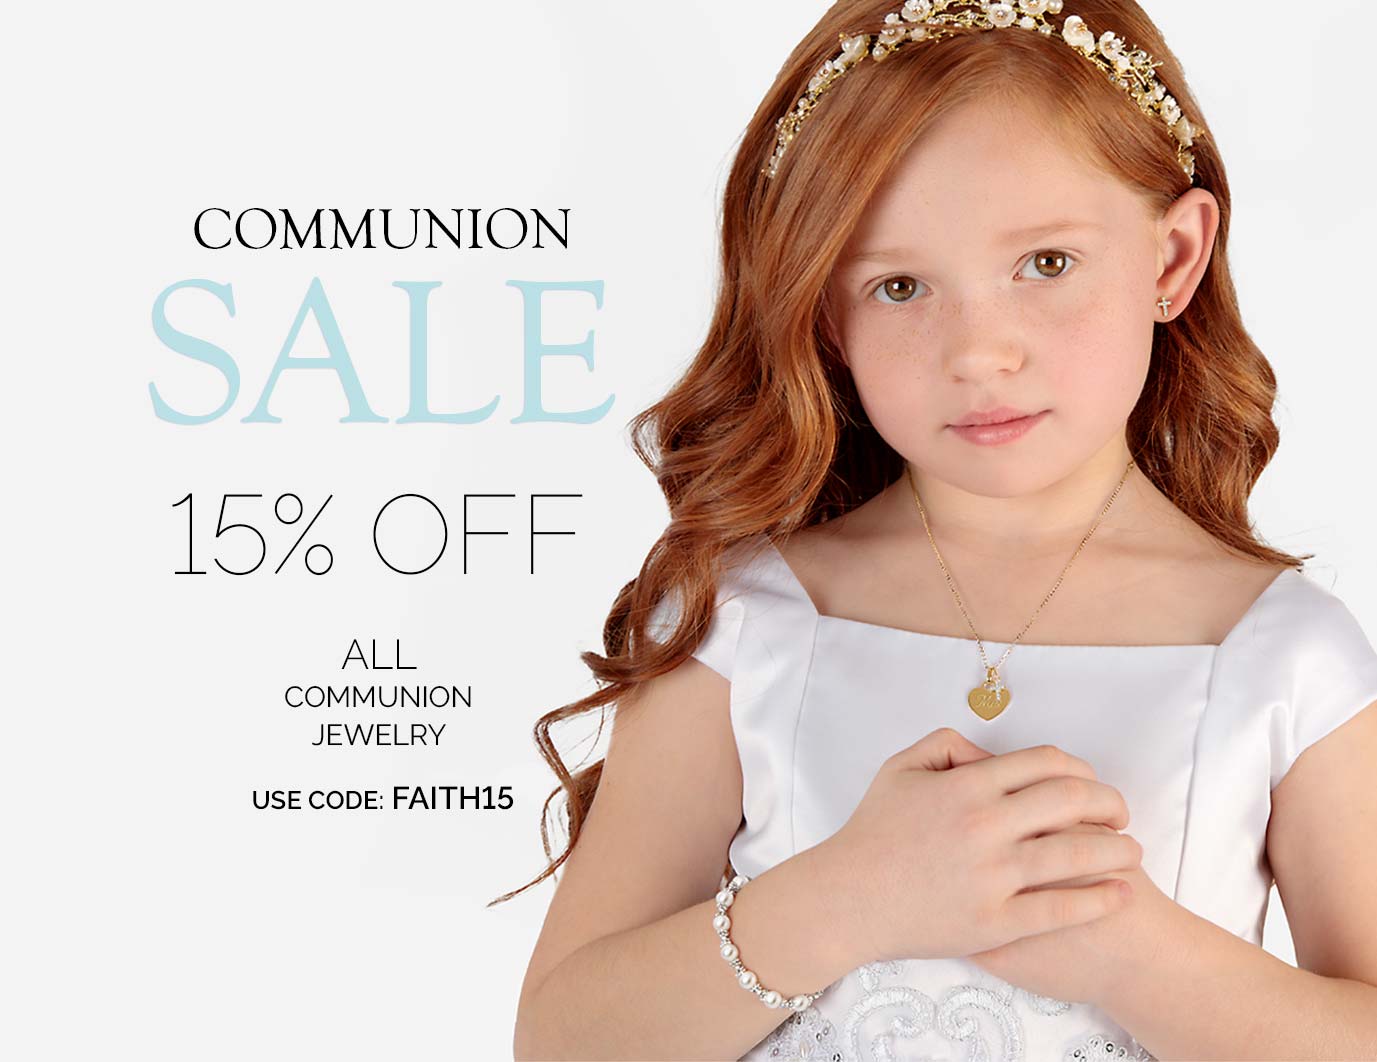 Religious Jewelry for Child's First Holy Communion